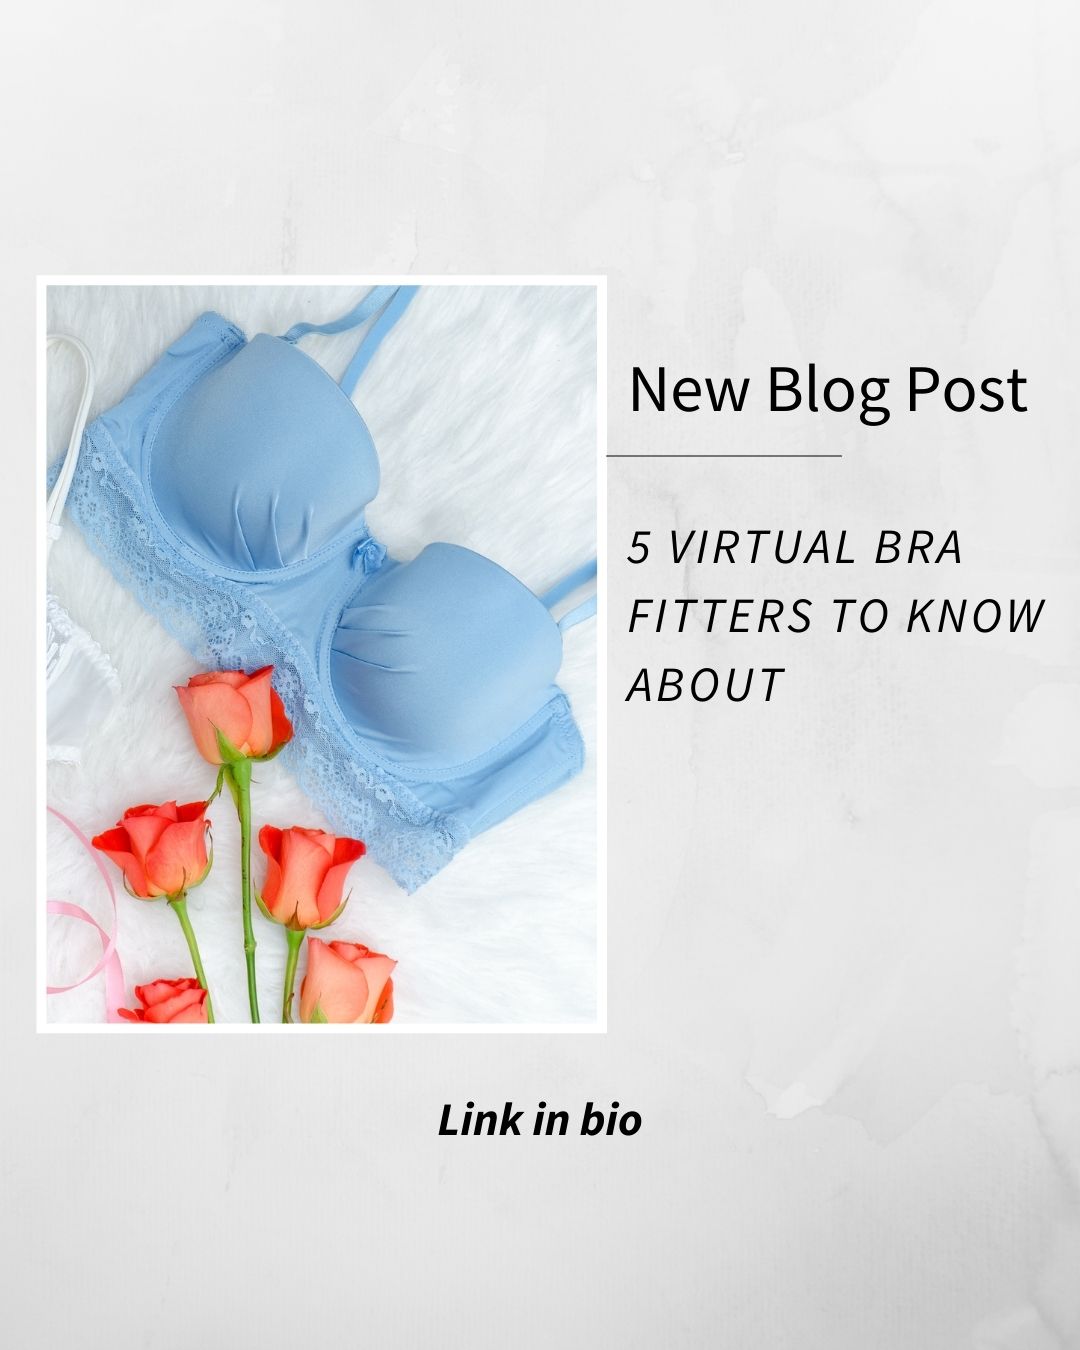 5 Virtual Bra Fitters You Should know About